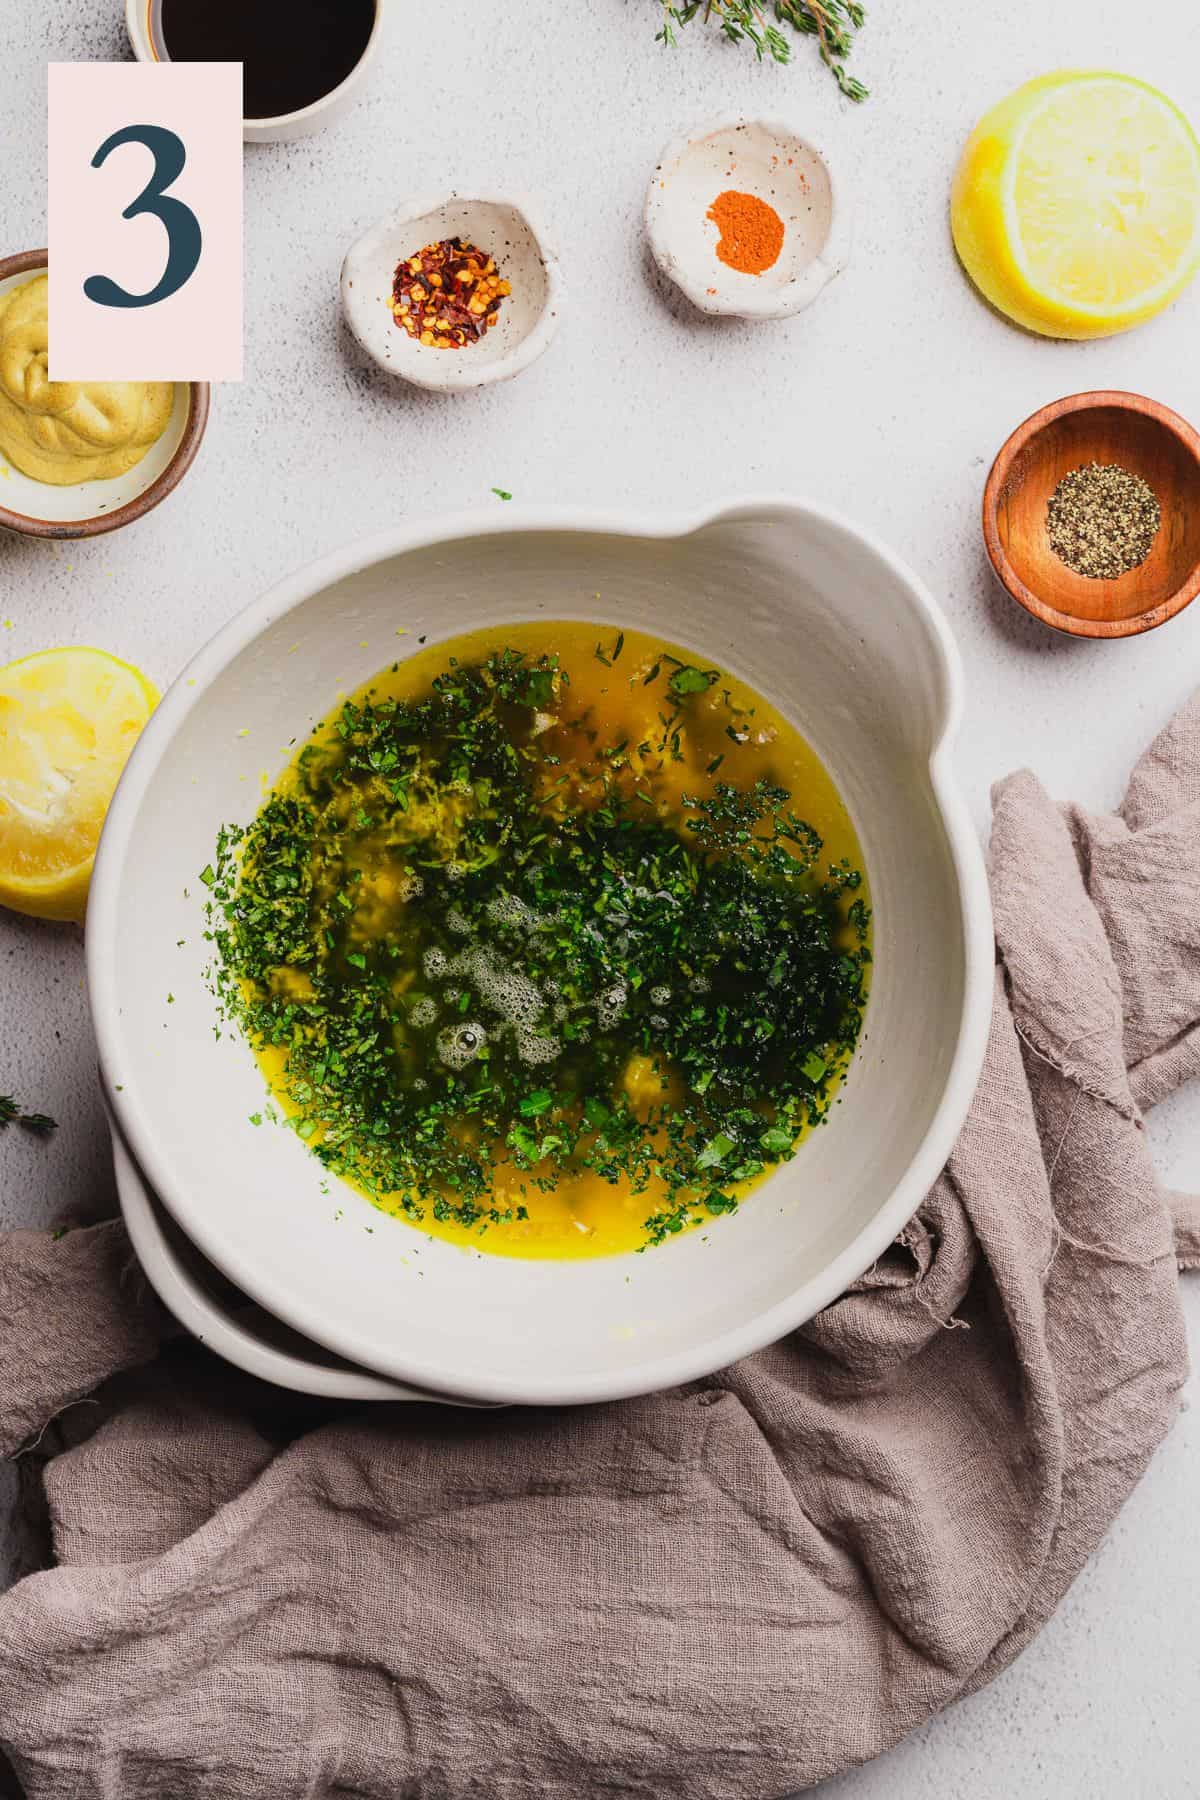 melted butter with chopped herbs, salt, pepper, lemon juice and zest in a mixing bowl.